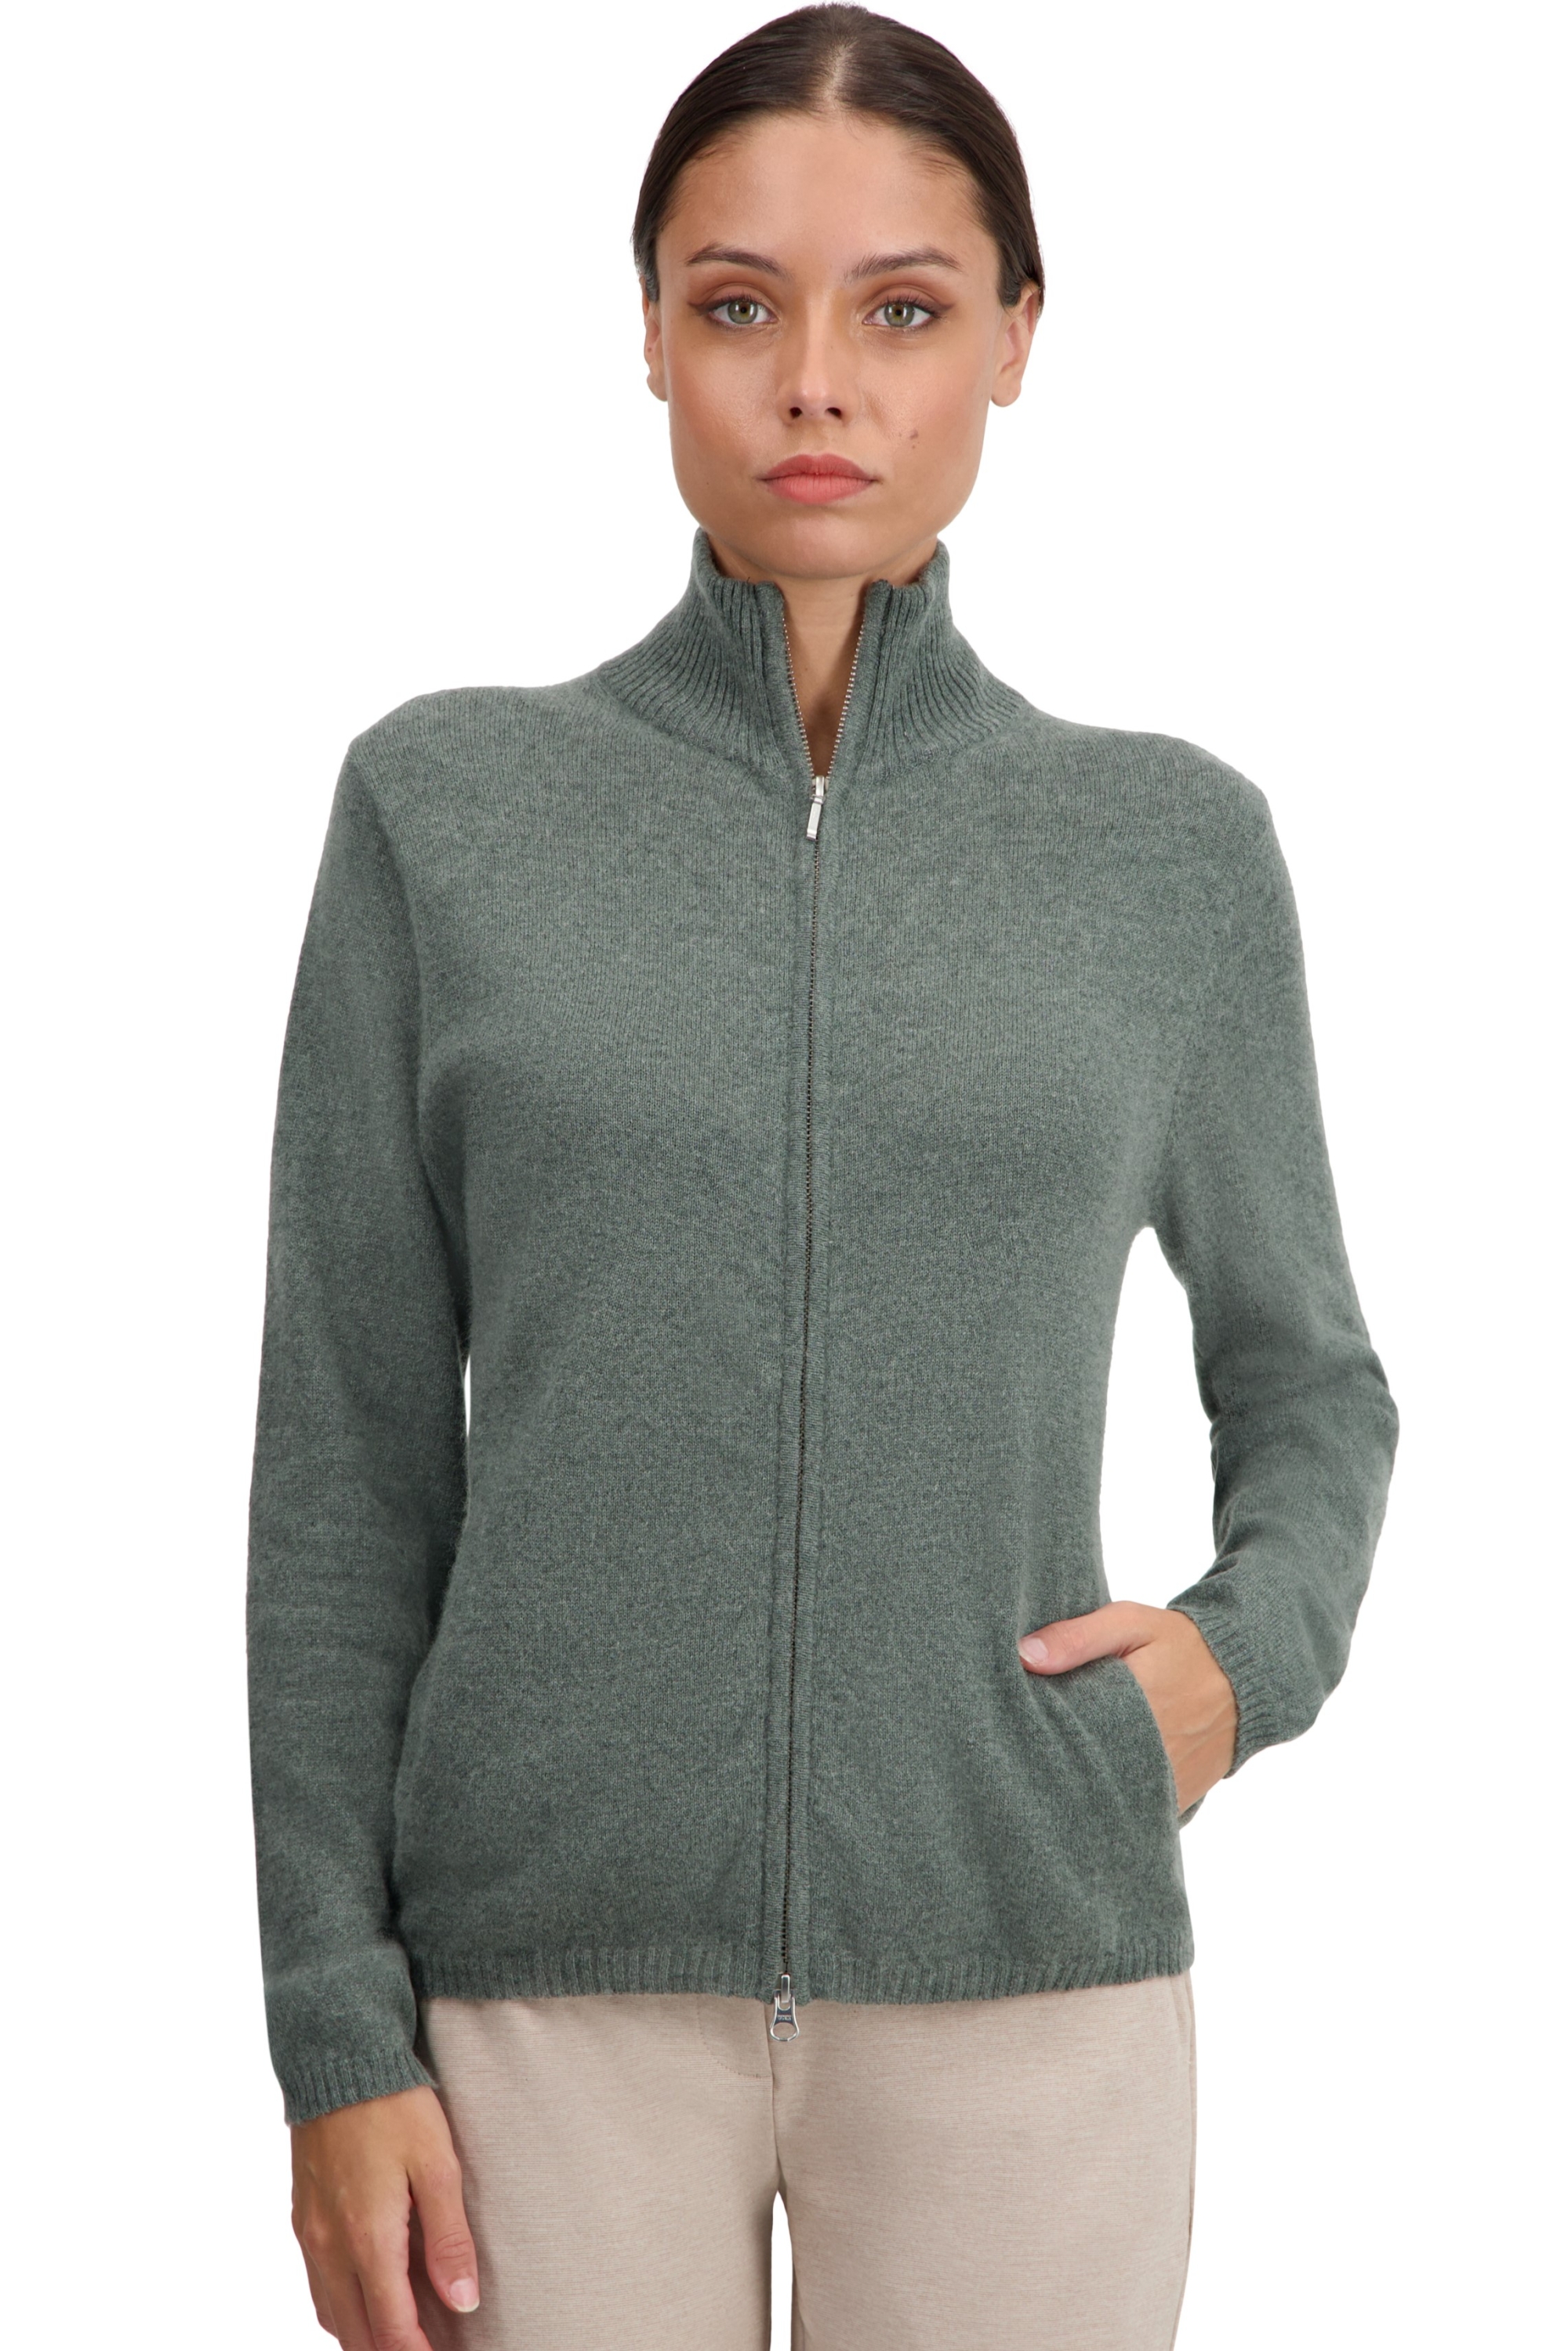 Cashmere ladies basic sweaters at low prices thames first military green s